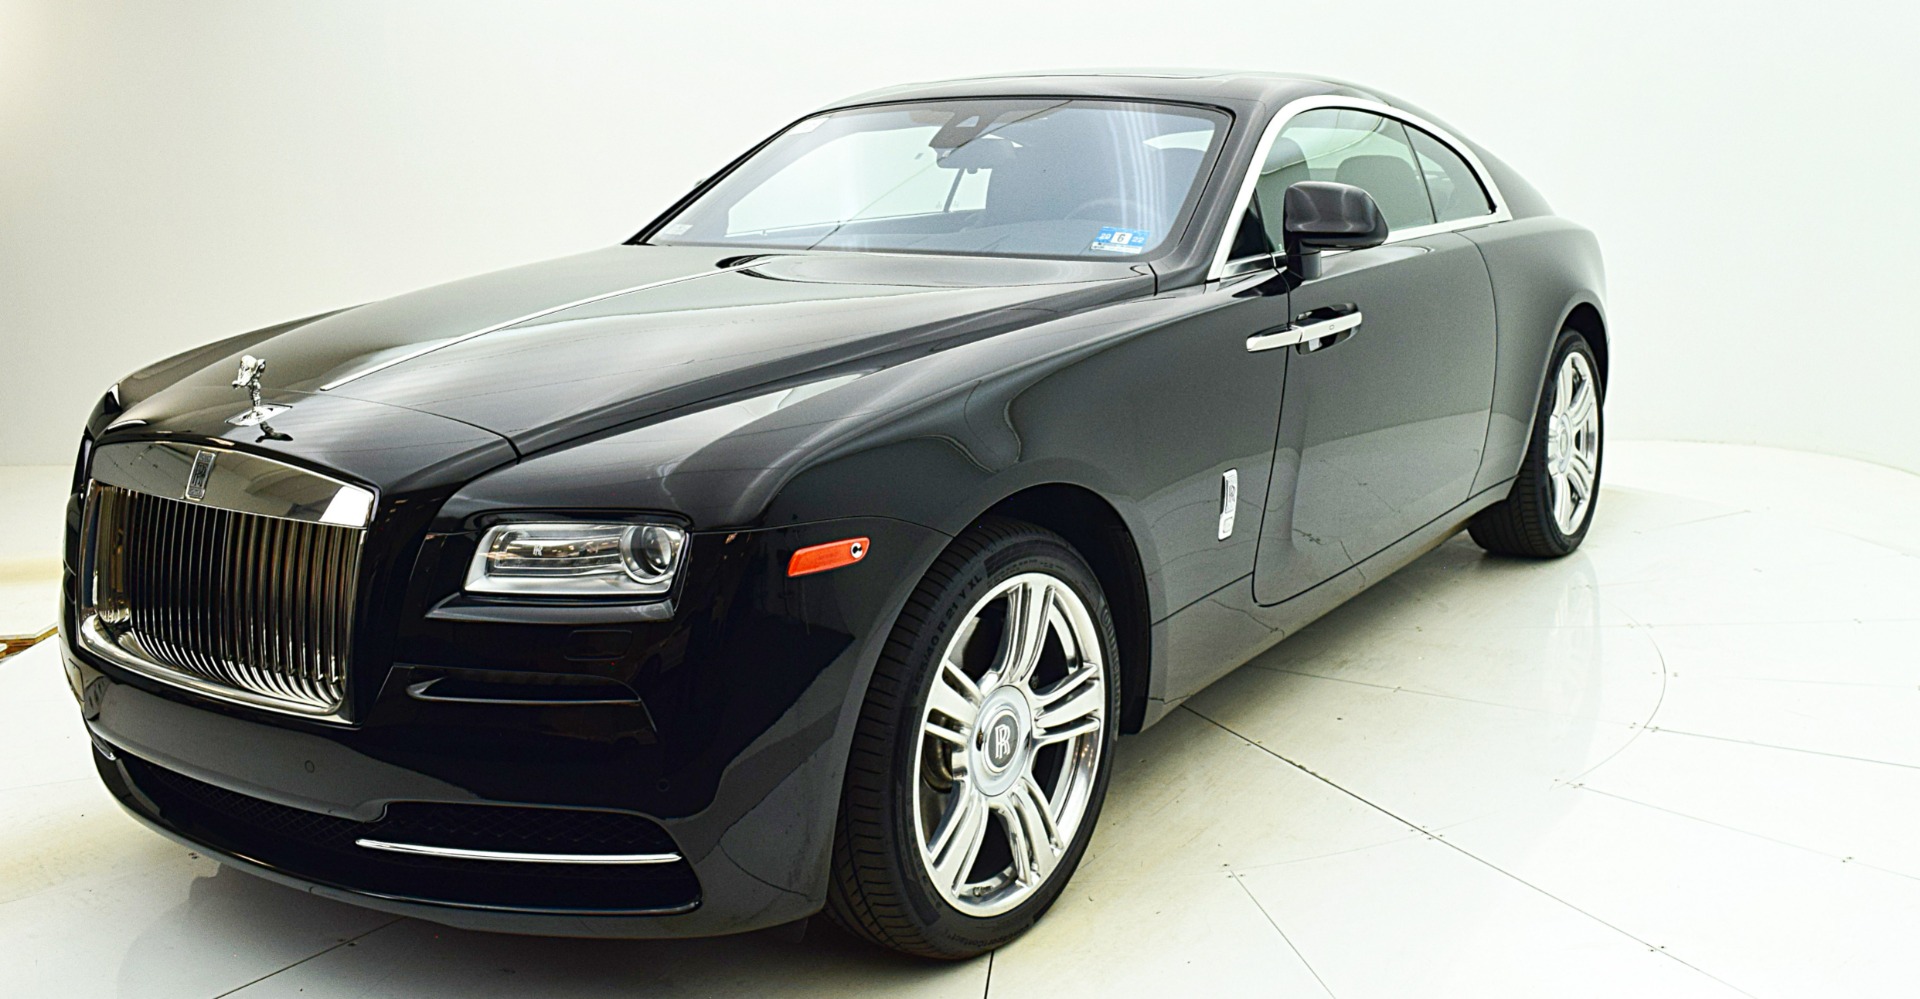 Used 2015 Rolls-Royce Wraith for sale Sold at Bentley Palmyra N.J. in Palmyra NJ 08065 2